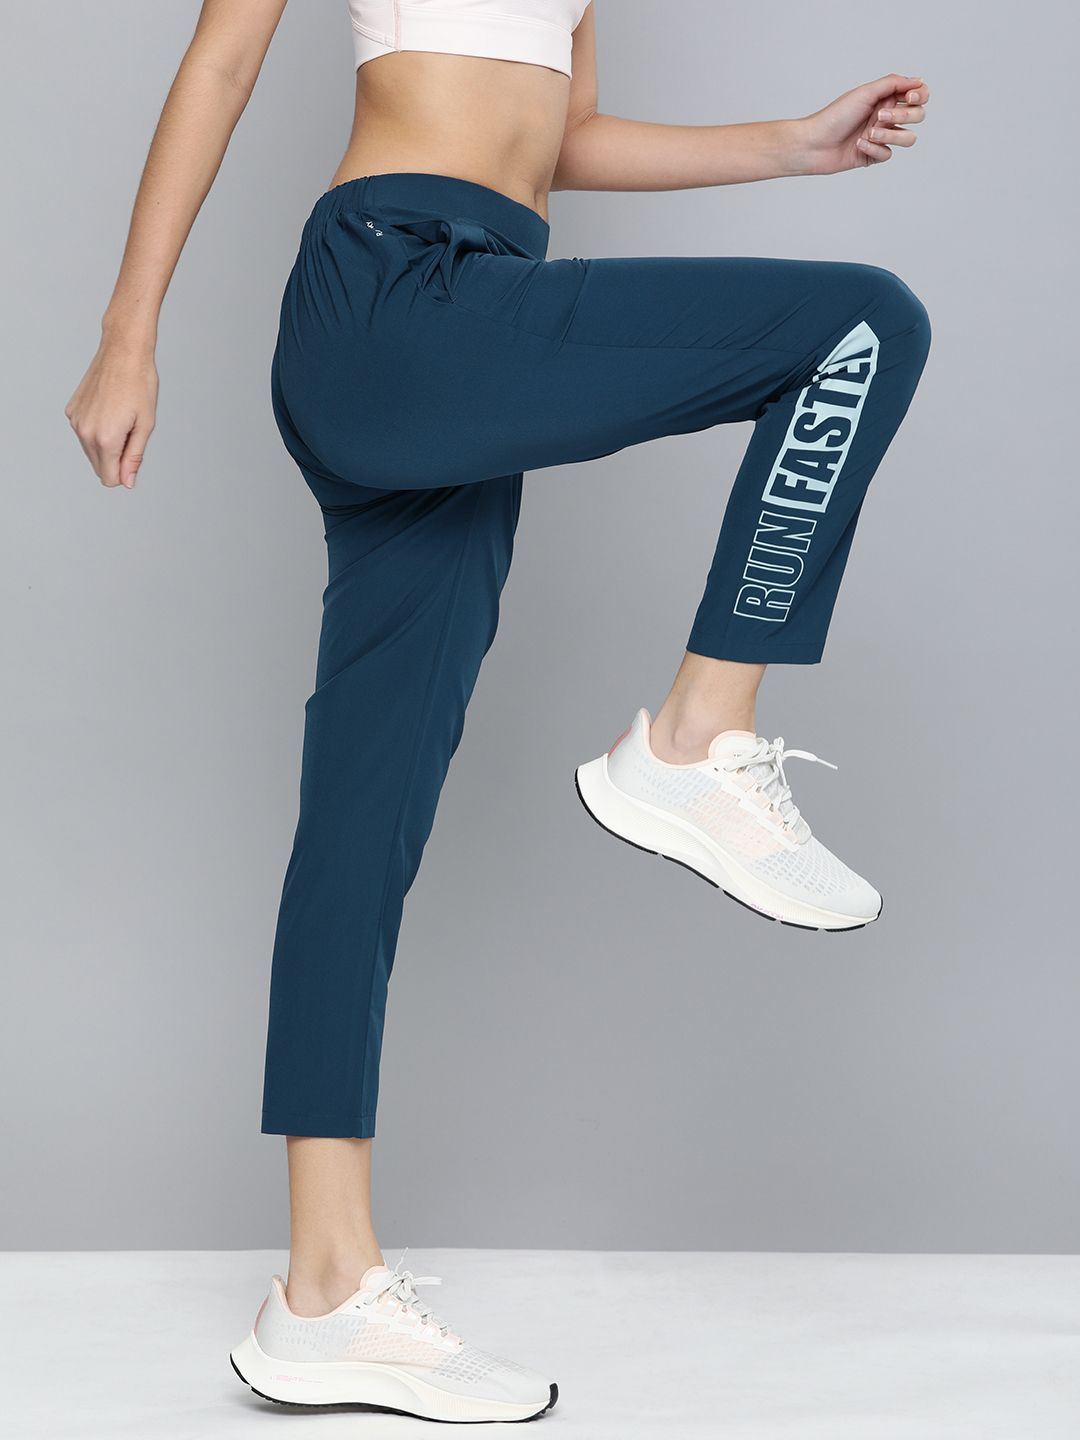 HRX by Hrithik Roshan Women Teal Blue Printed Rapid Dry Antimicrobial Running Track Pants Price in India